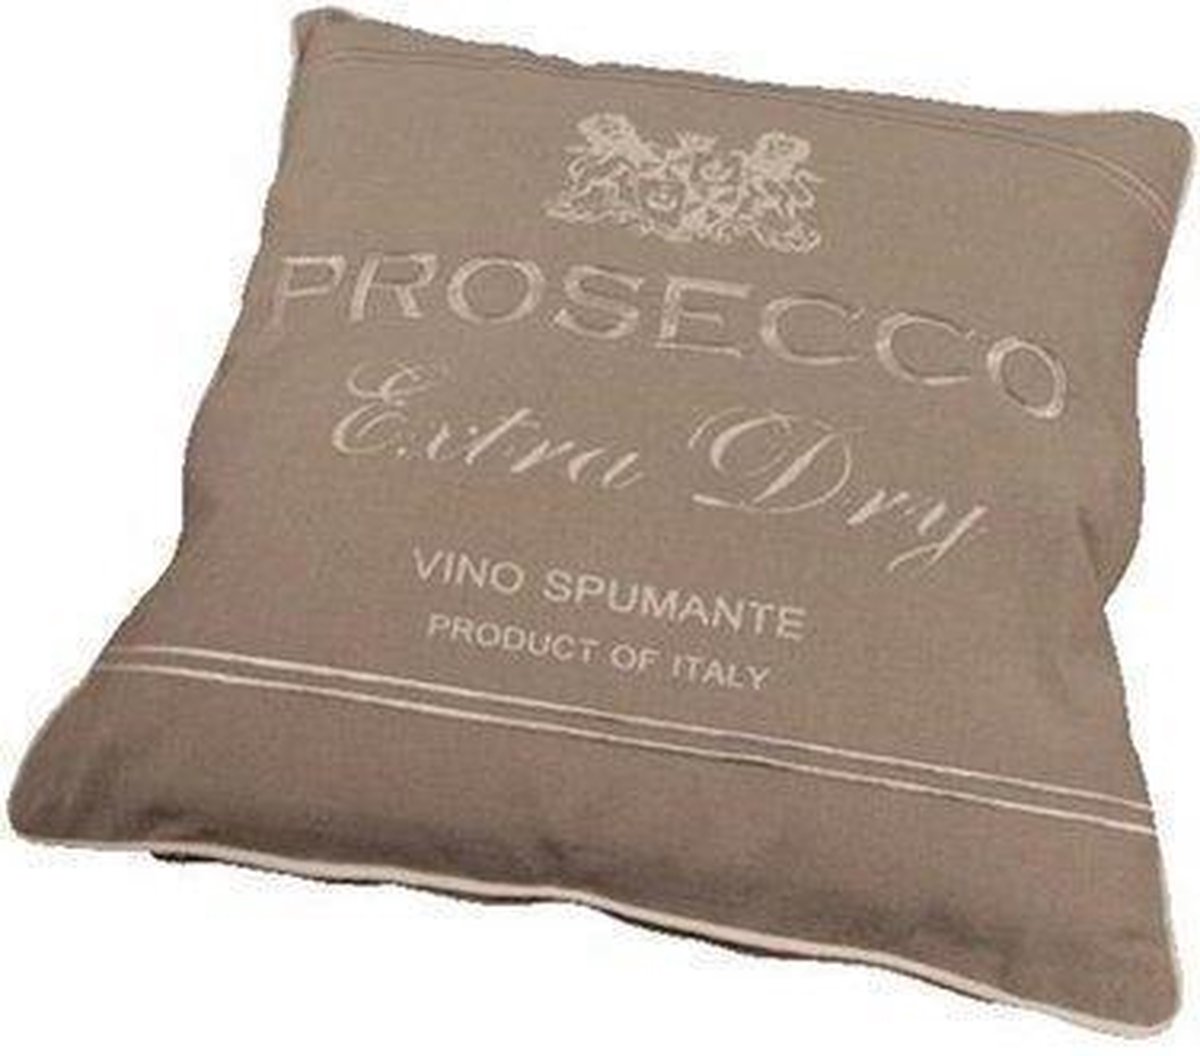 Prosecco kussenhoes - Taupe - 45x45 cm | bol.com